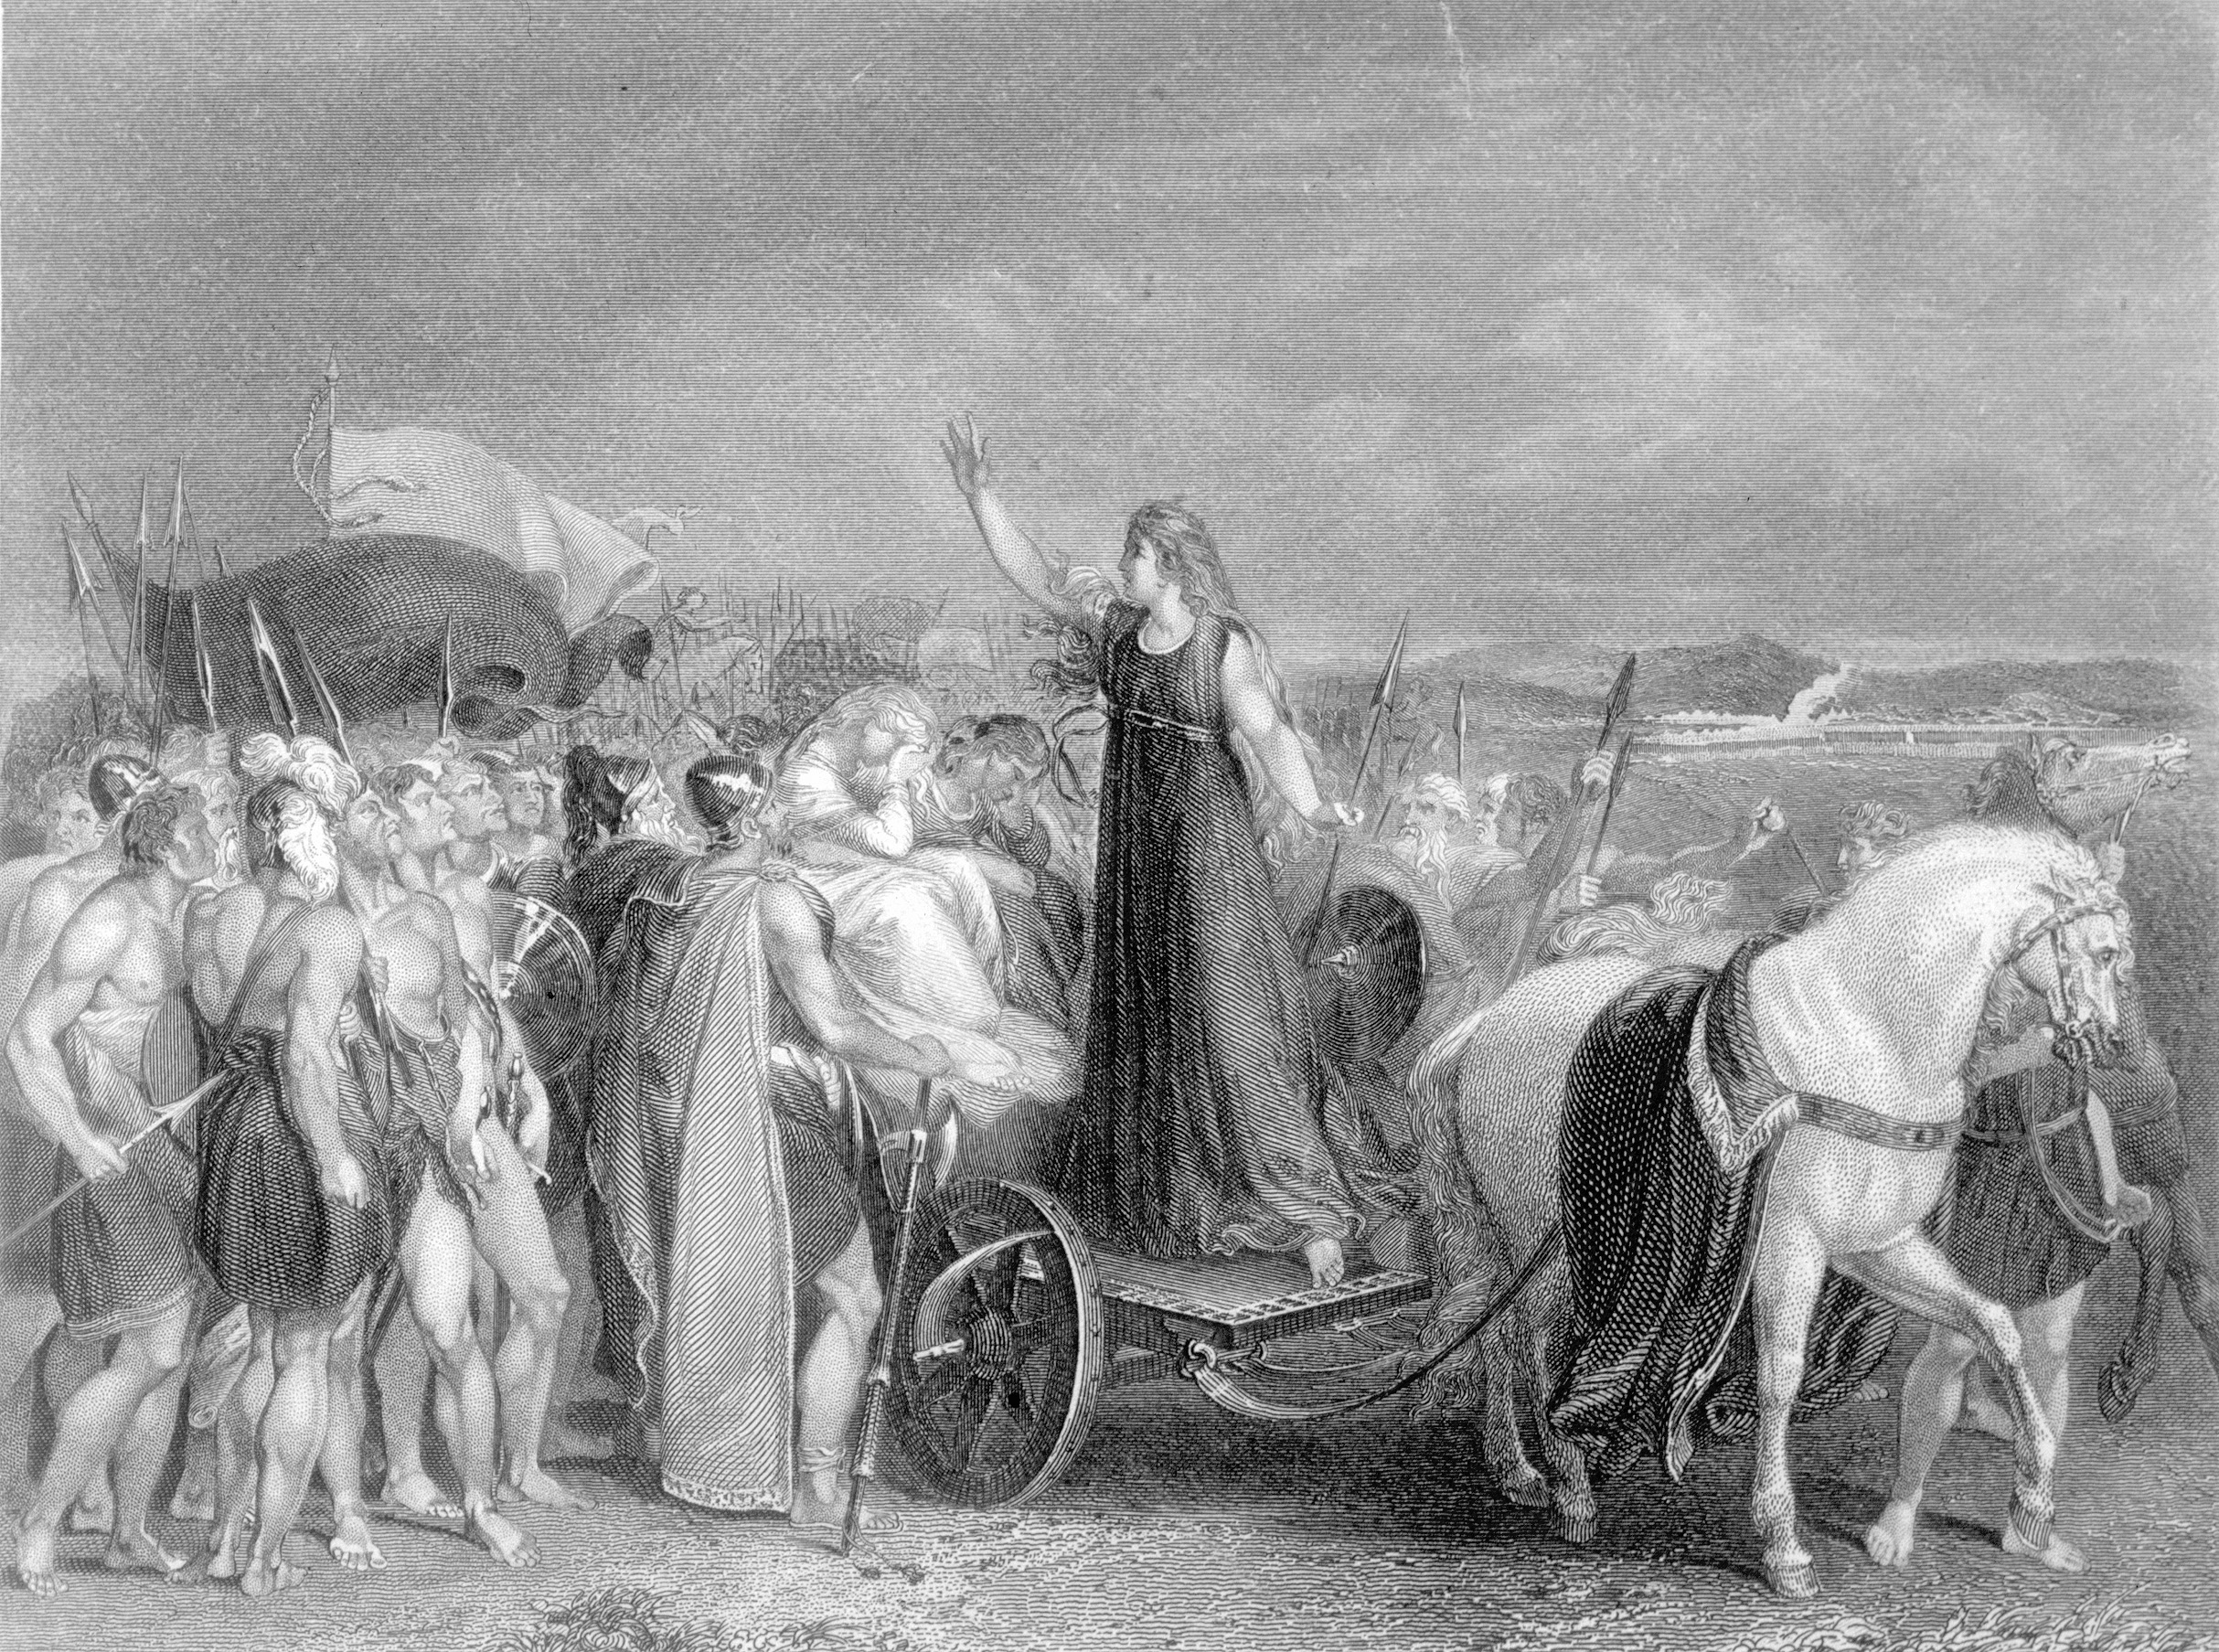 Boudicca addresses the Britons before they go forth to battle the Roman legions. “We must conquer or die with glory,” she told them. 